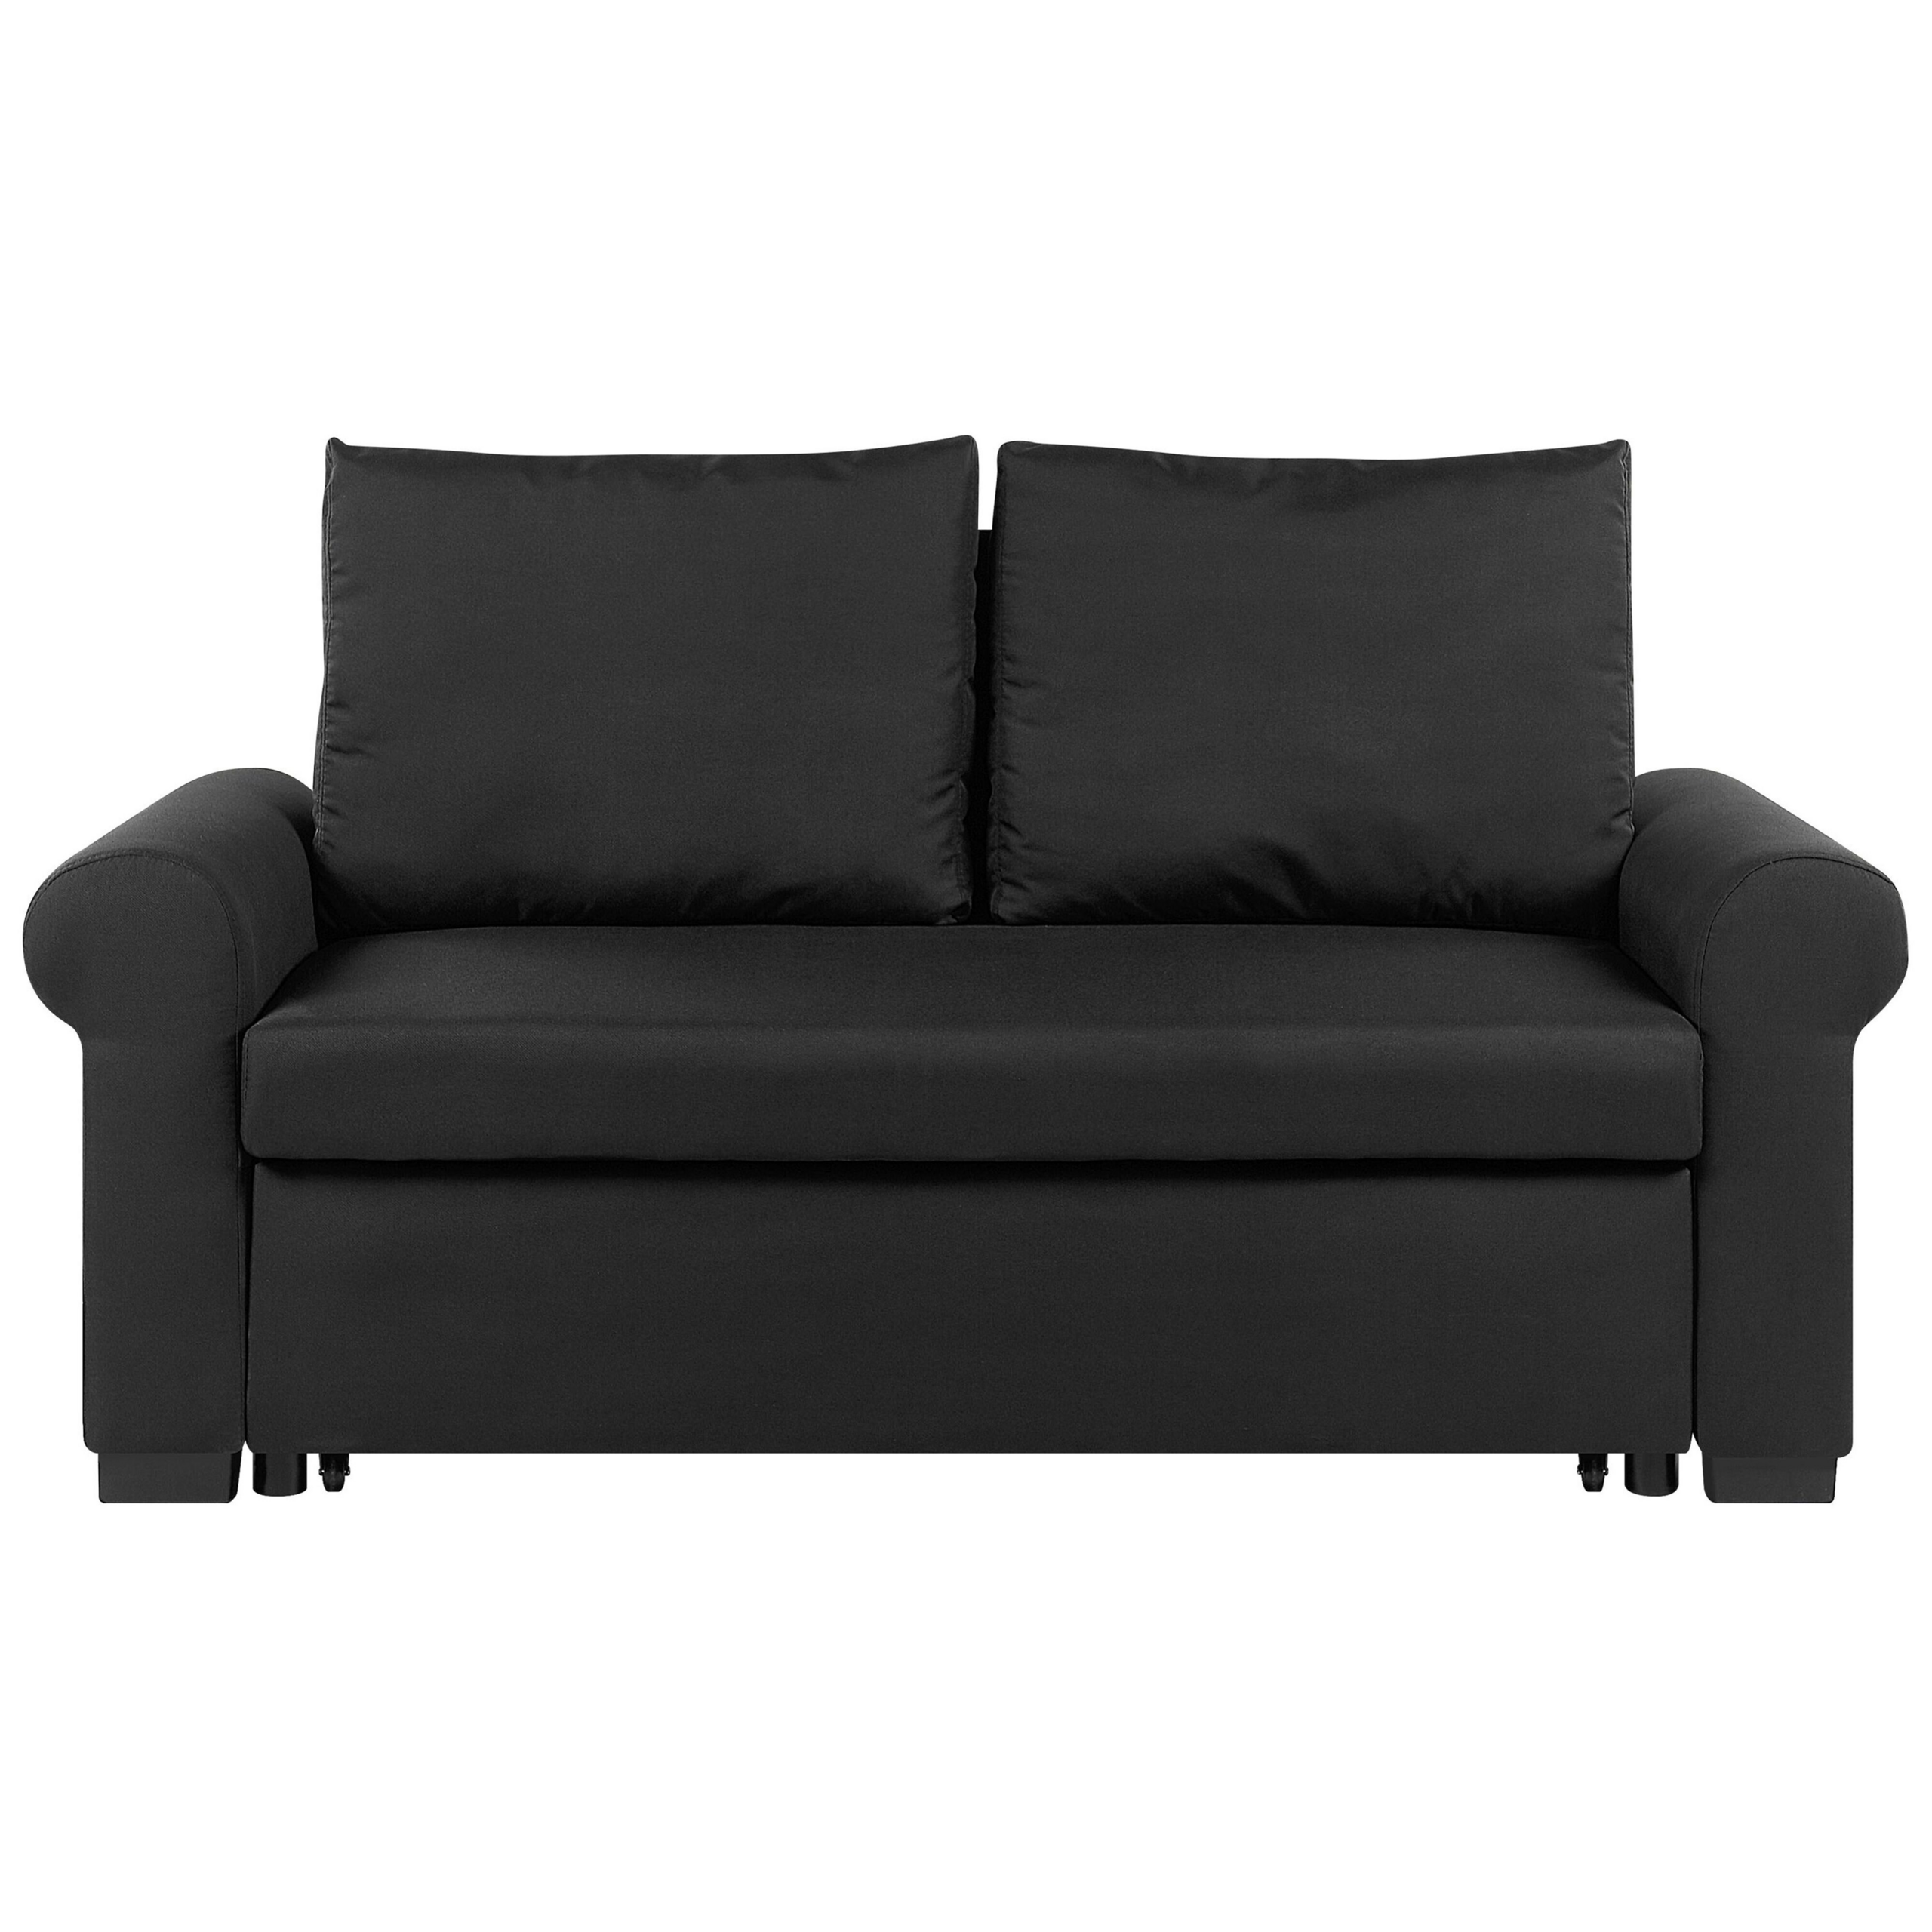 Beliani Sofa Bed Black Polyester Fabric 2 Seater Pull-Out Convertible Sleeper Retro